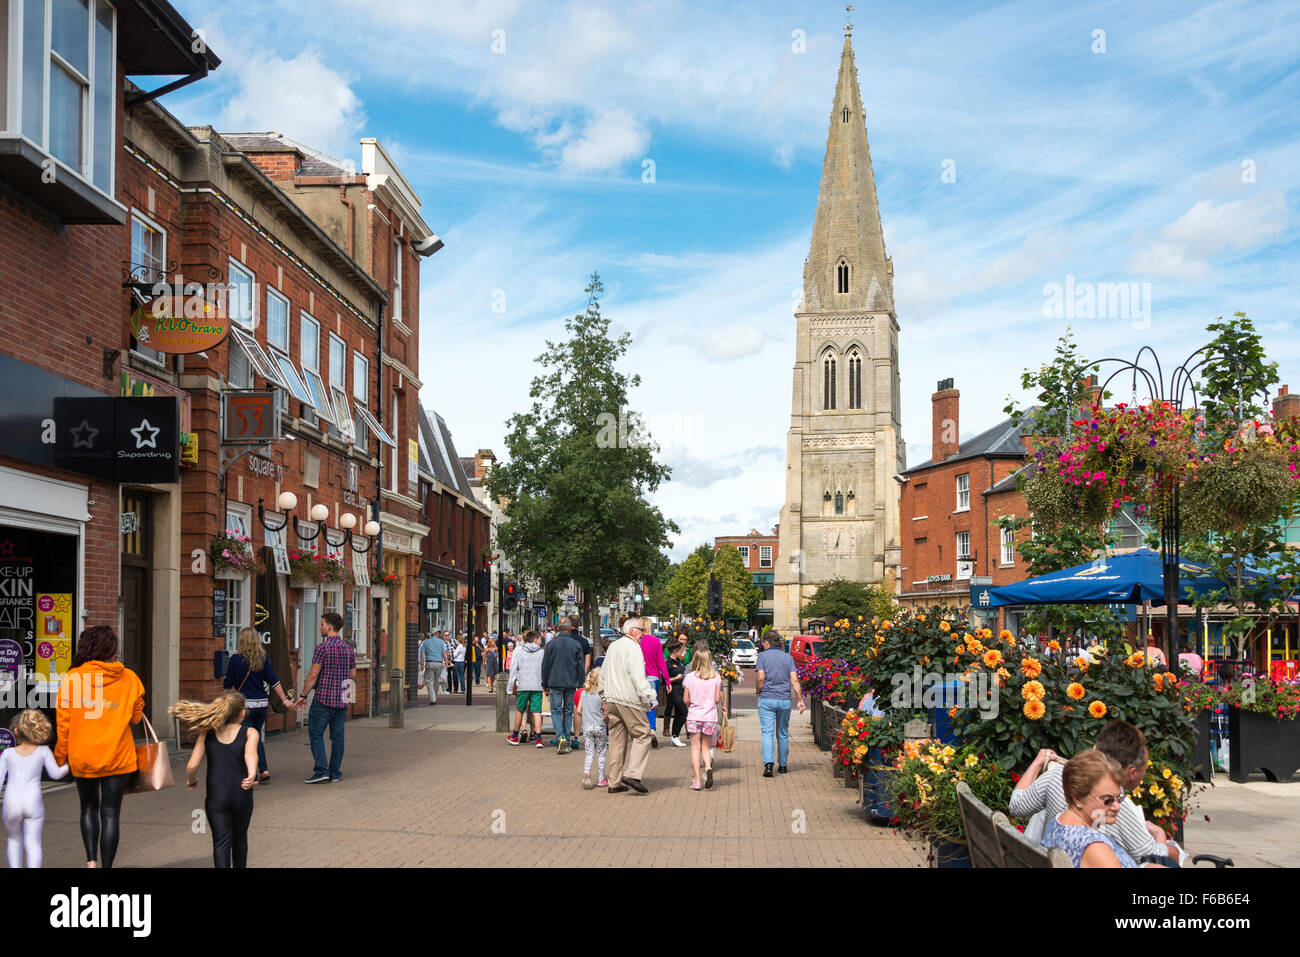 The Square showing St Dionysius' Church spire, Market Harborough, Leicestershire, England, United Kingdom Stock Photo